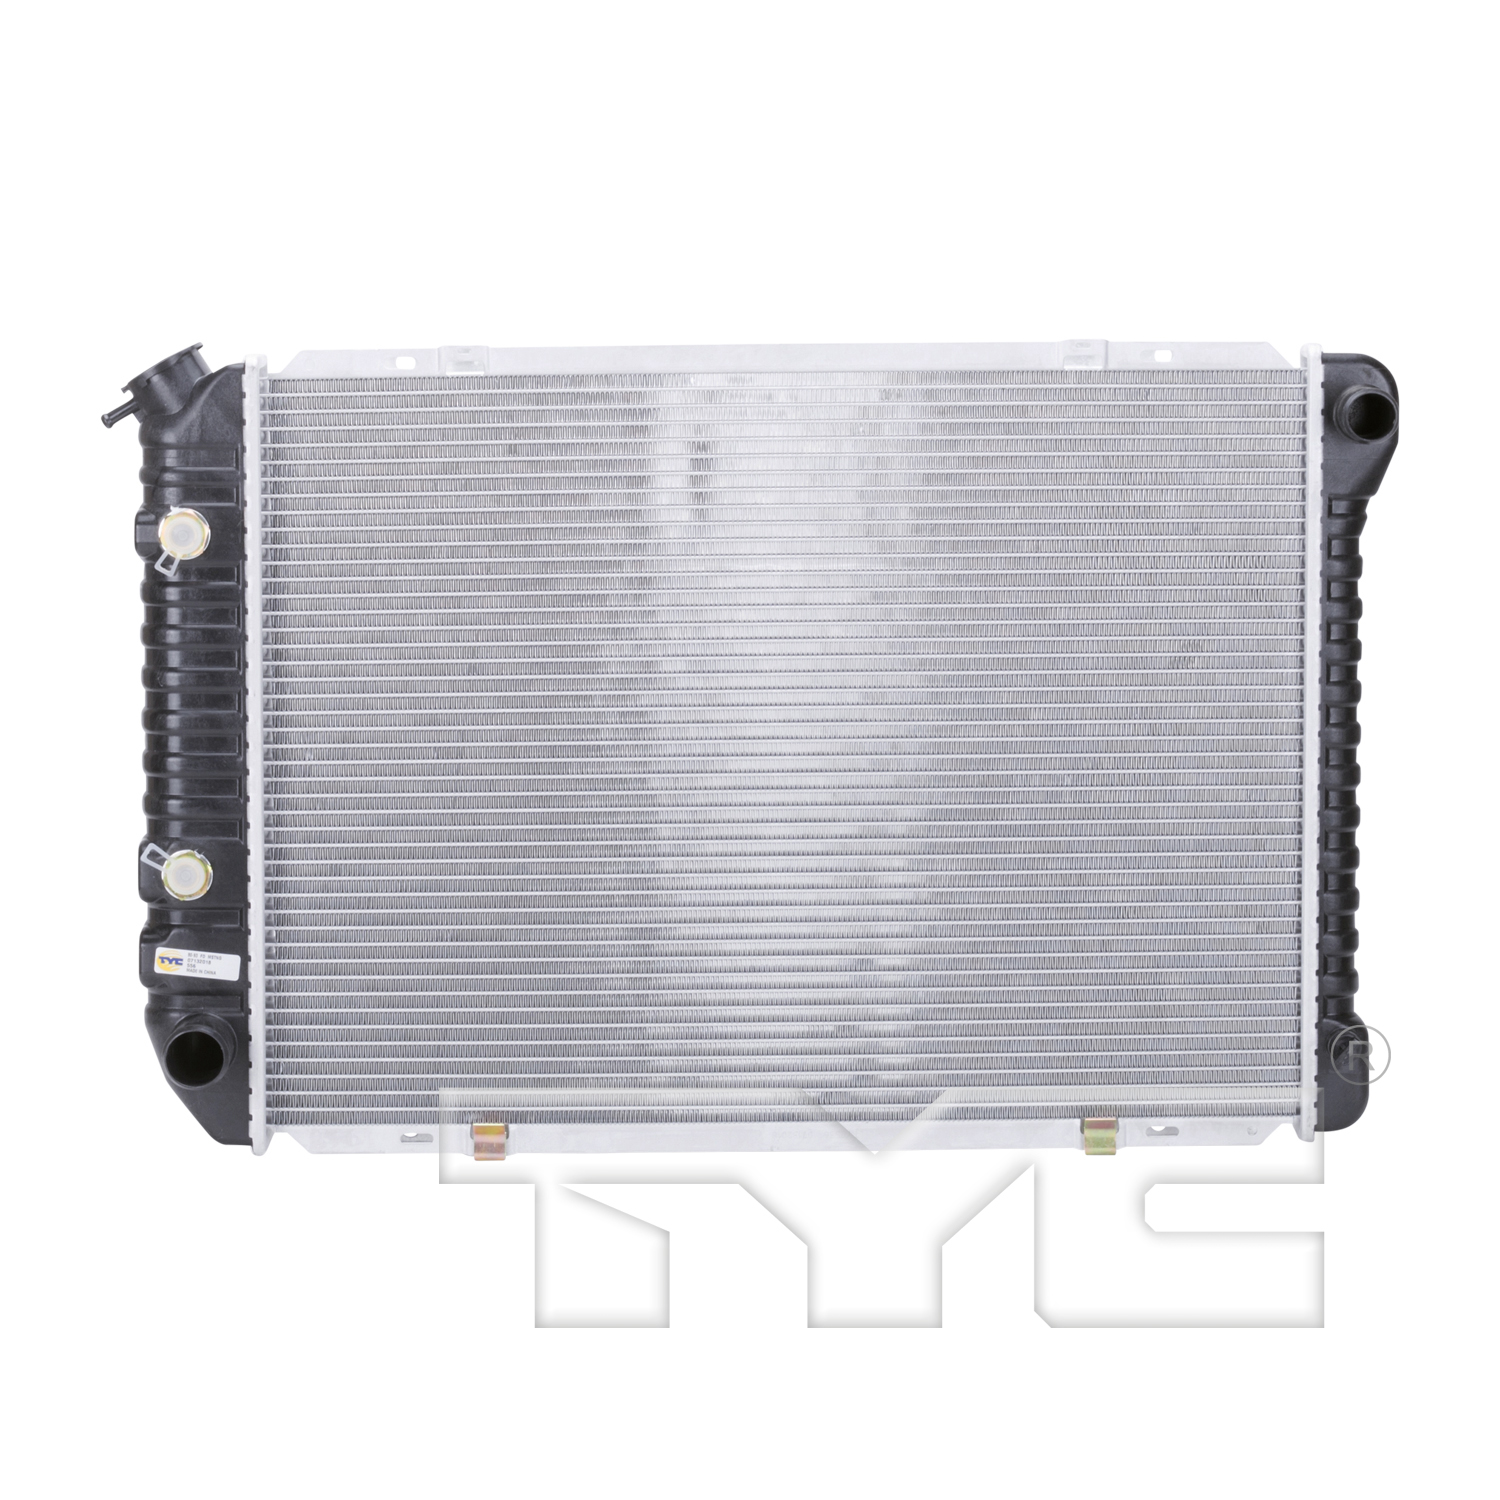 Aftermarket RADIATORS for FORD - MUSTANG, MUSTANG,87-88,Radiator assembly